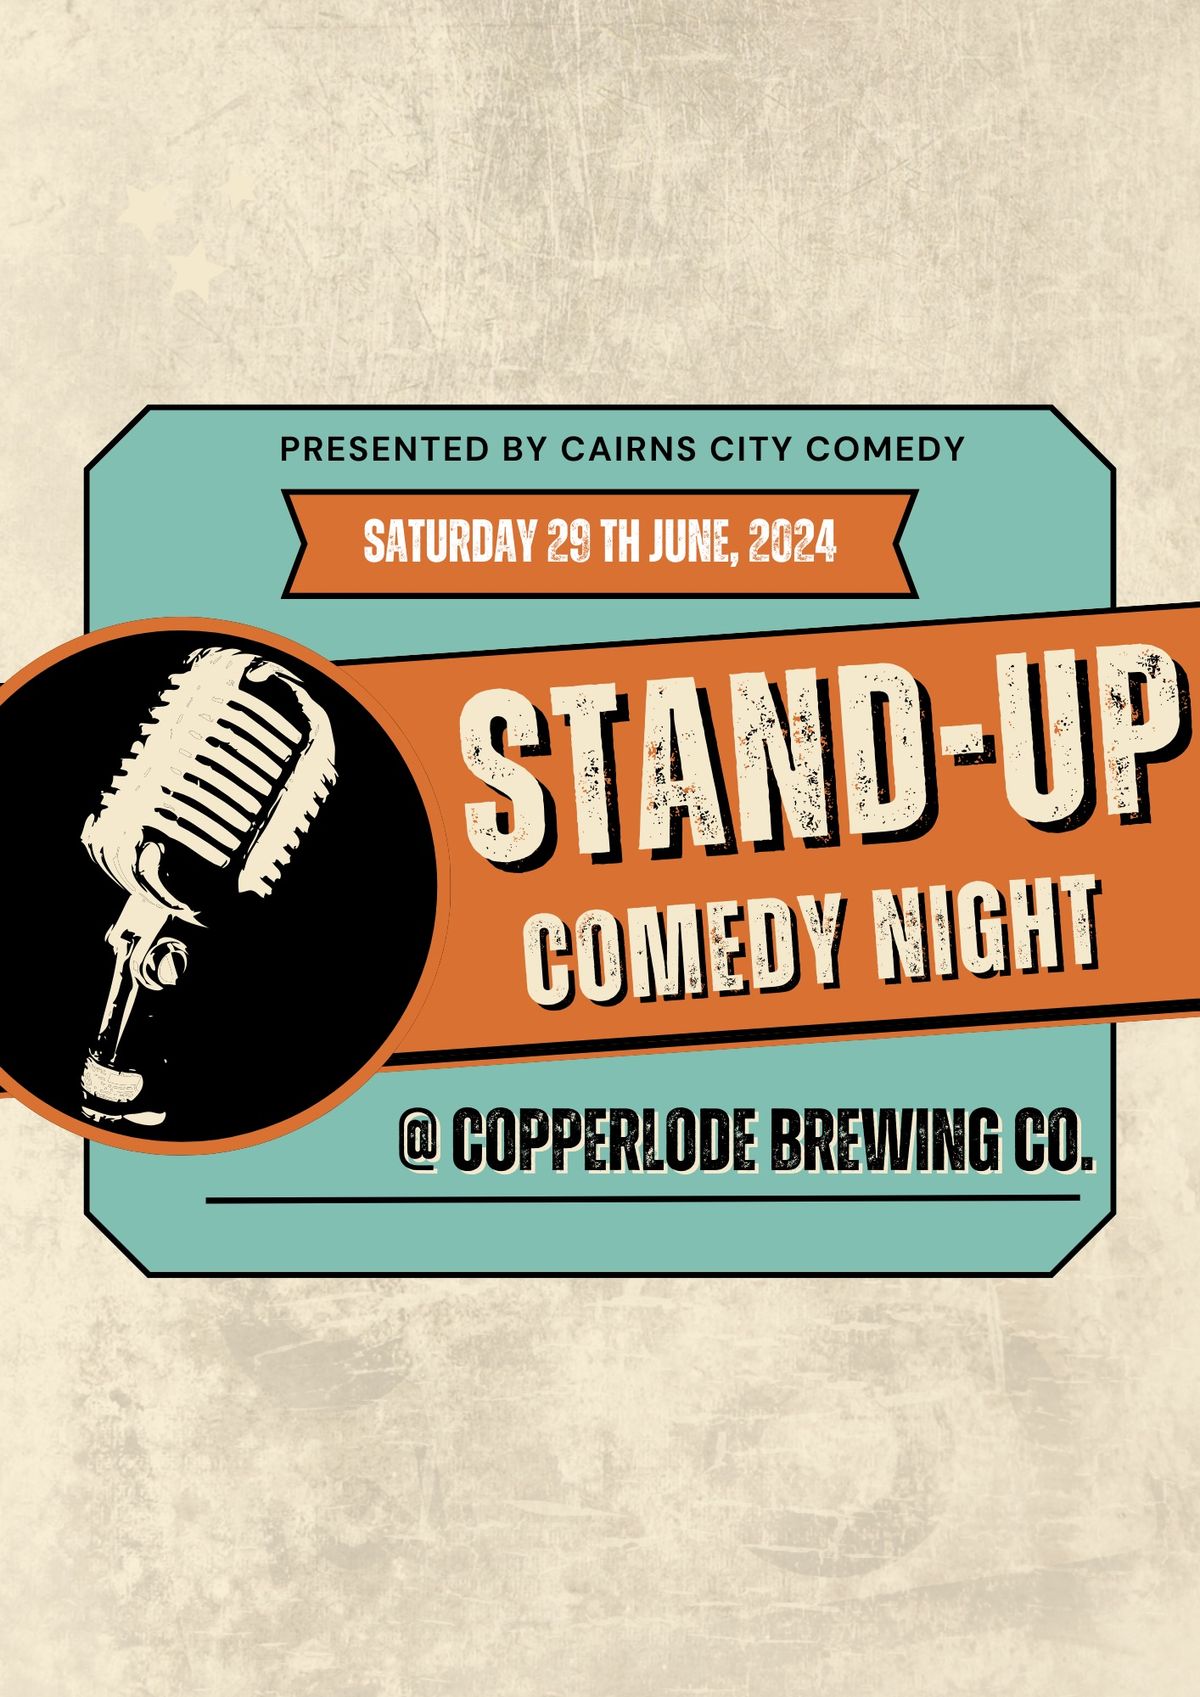 Comedy Night @ Copperlode Brewing Co.